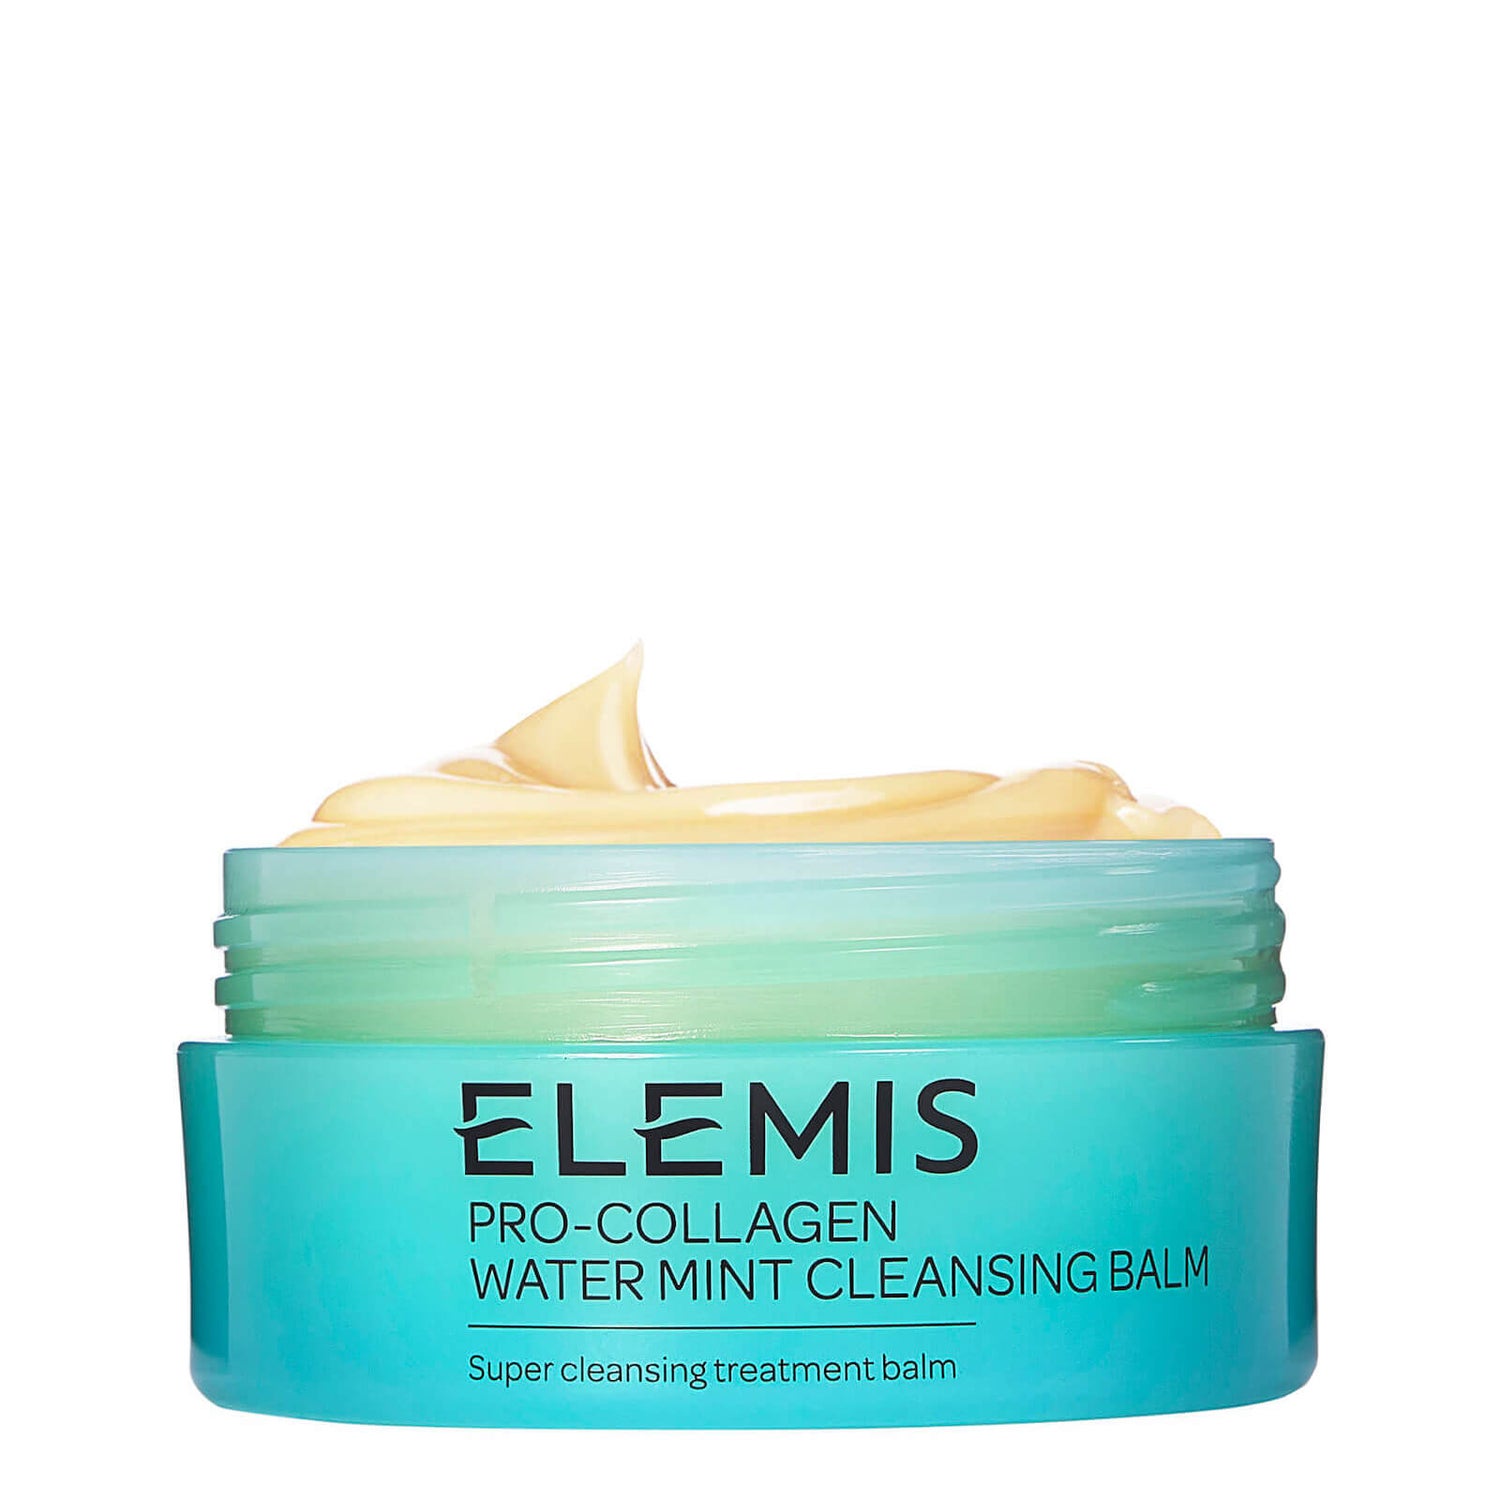 Pro-Collagen Water Mint Cleansing Balm 100g